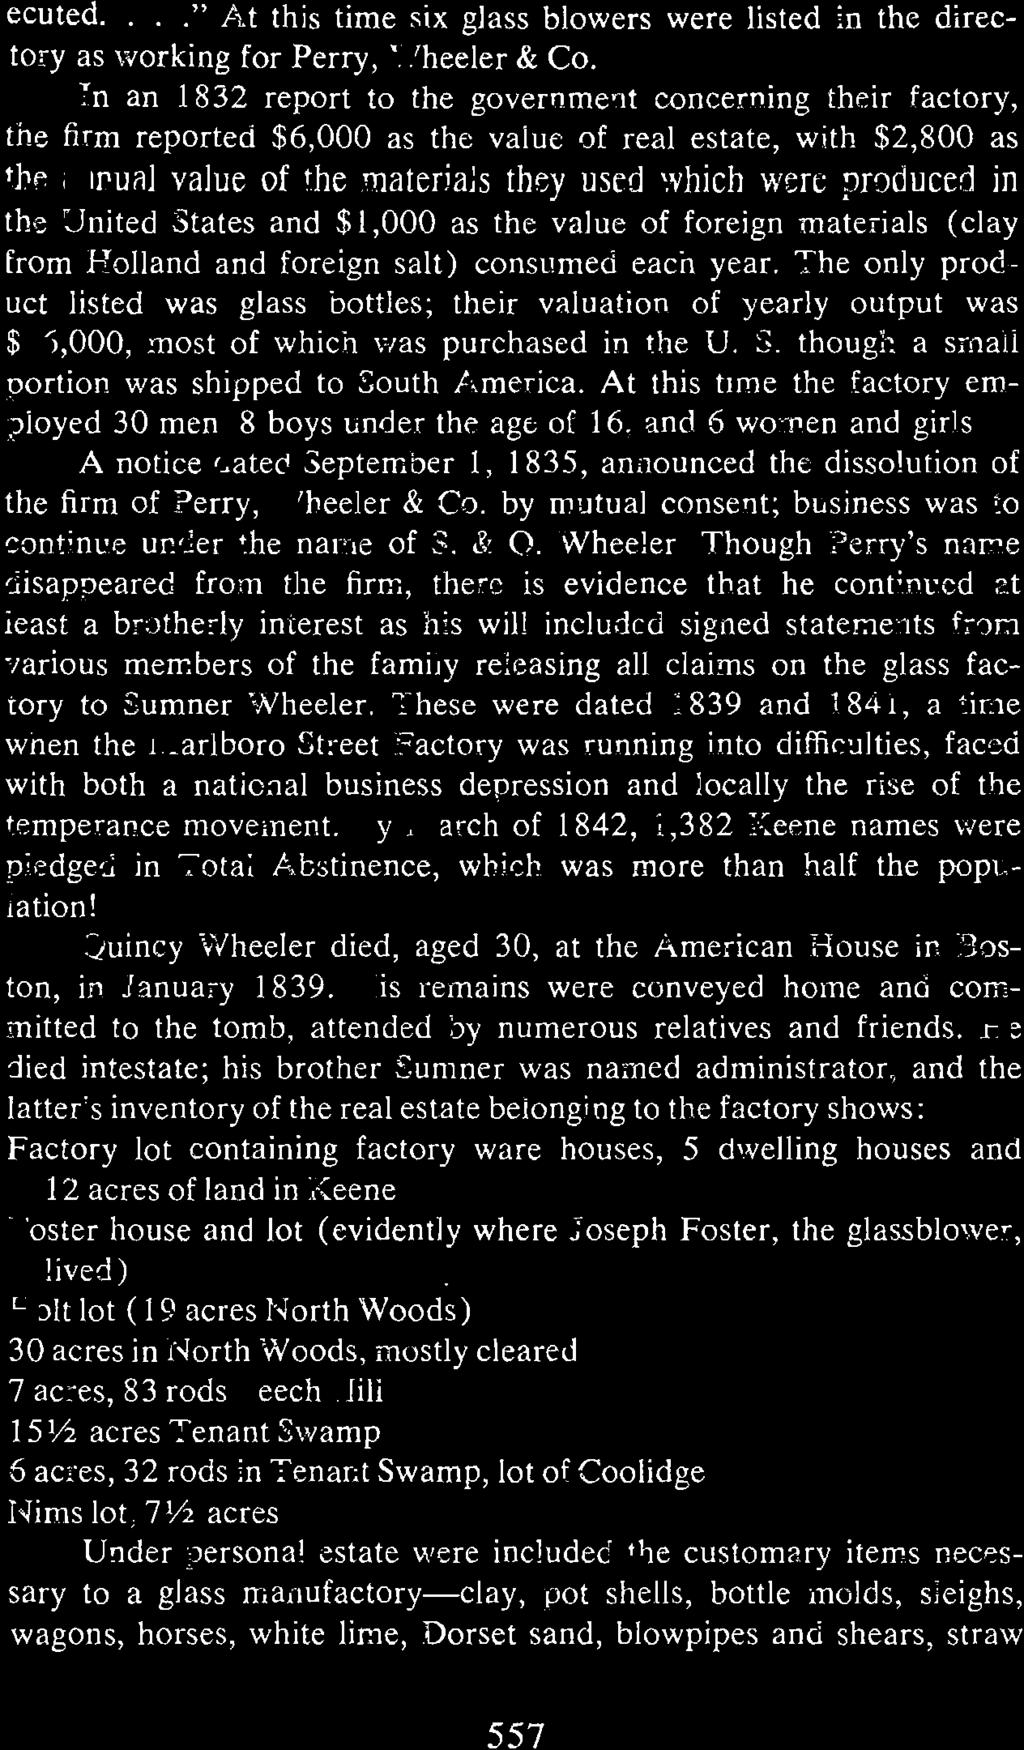 At this time the factory employed 30 men, 8 boys under the age of 16, and 6 wome n and girls. A notice dated September I, 1835, announced the dissolution of the firm of Perry, Wheeler & Co.